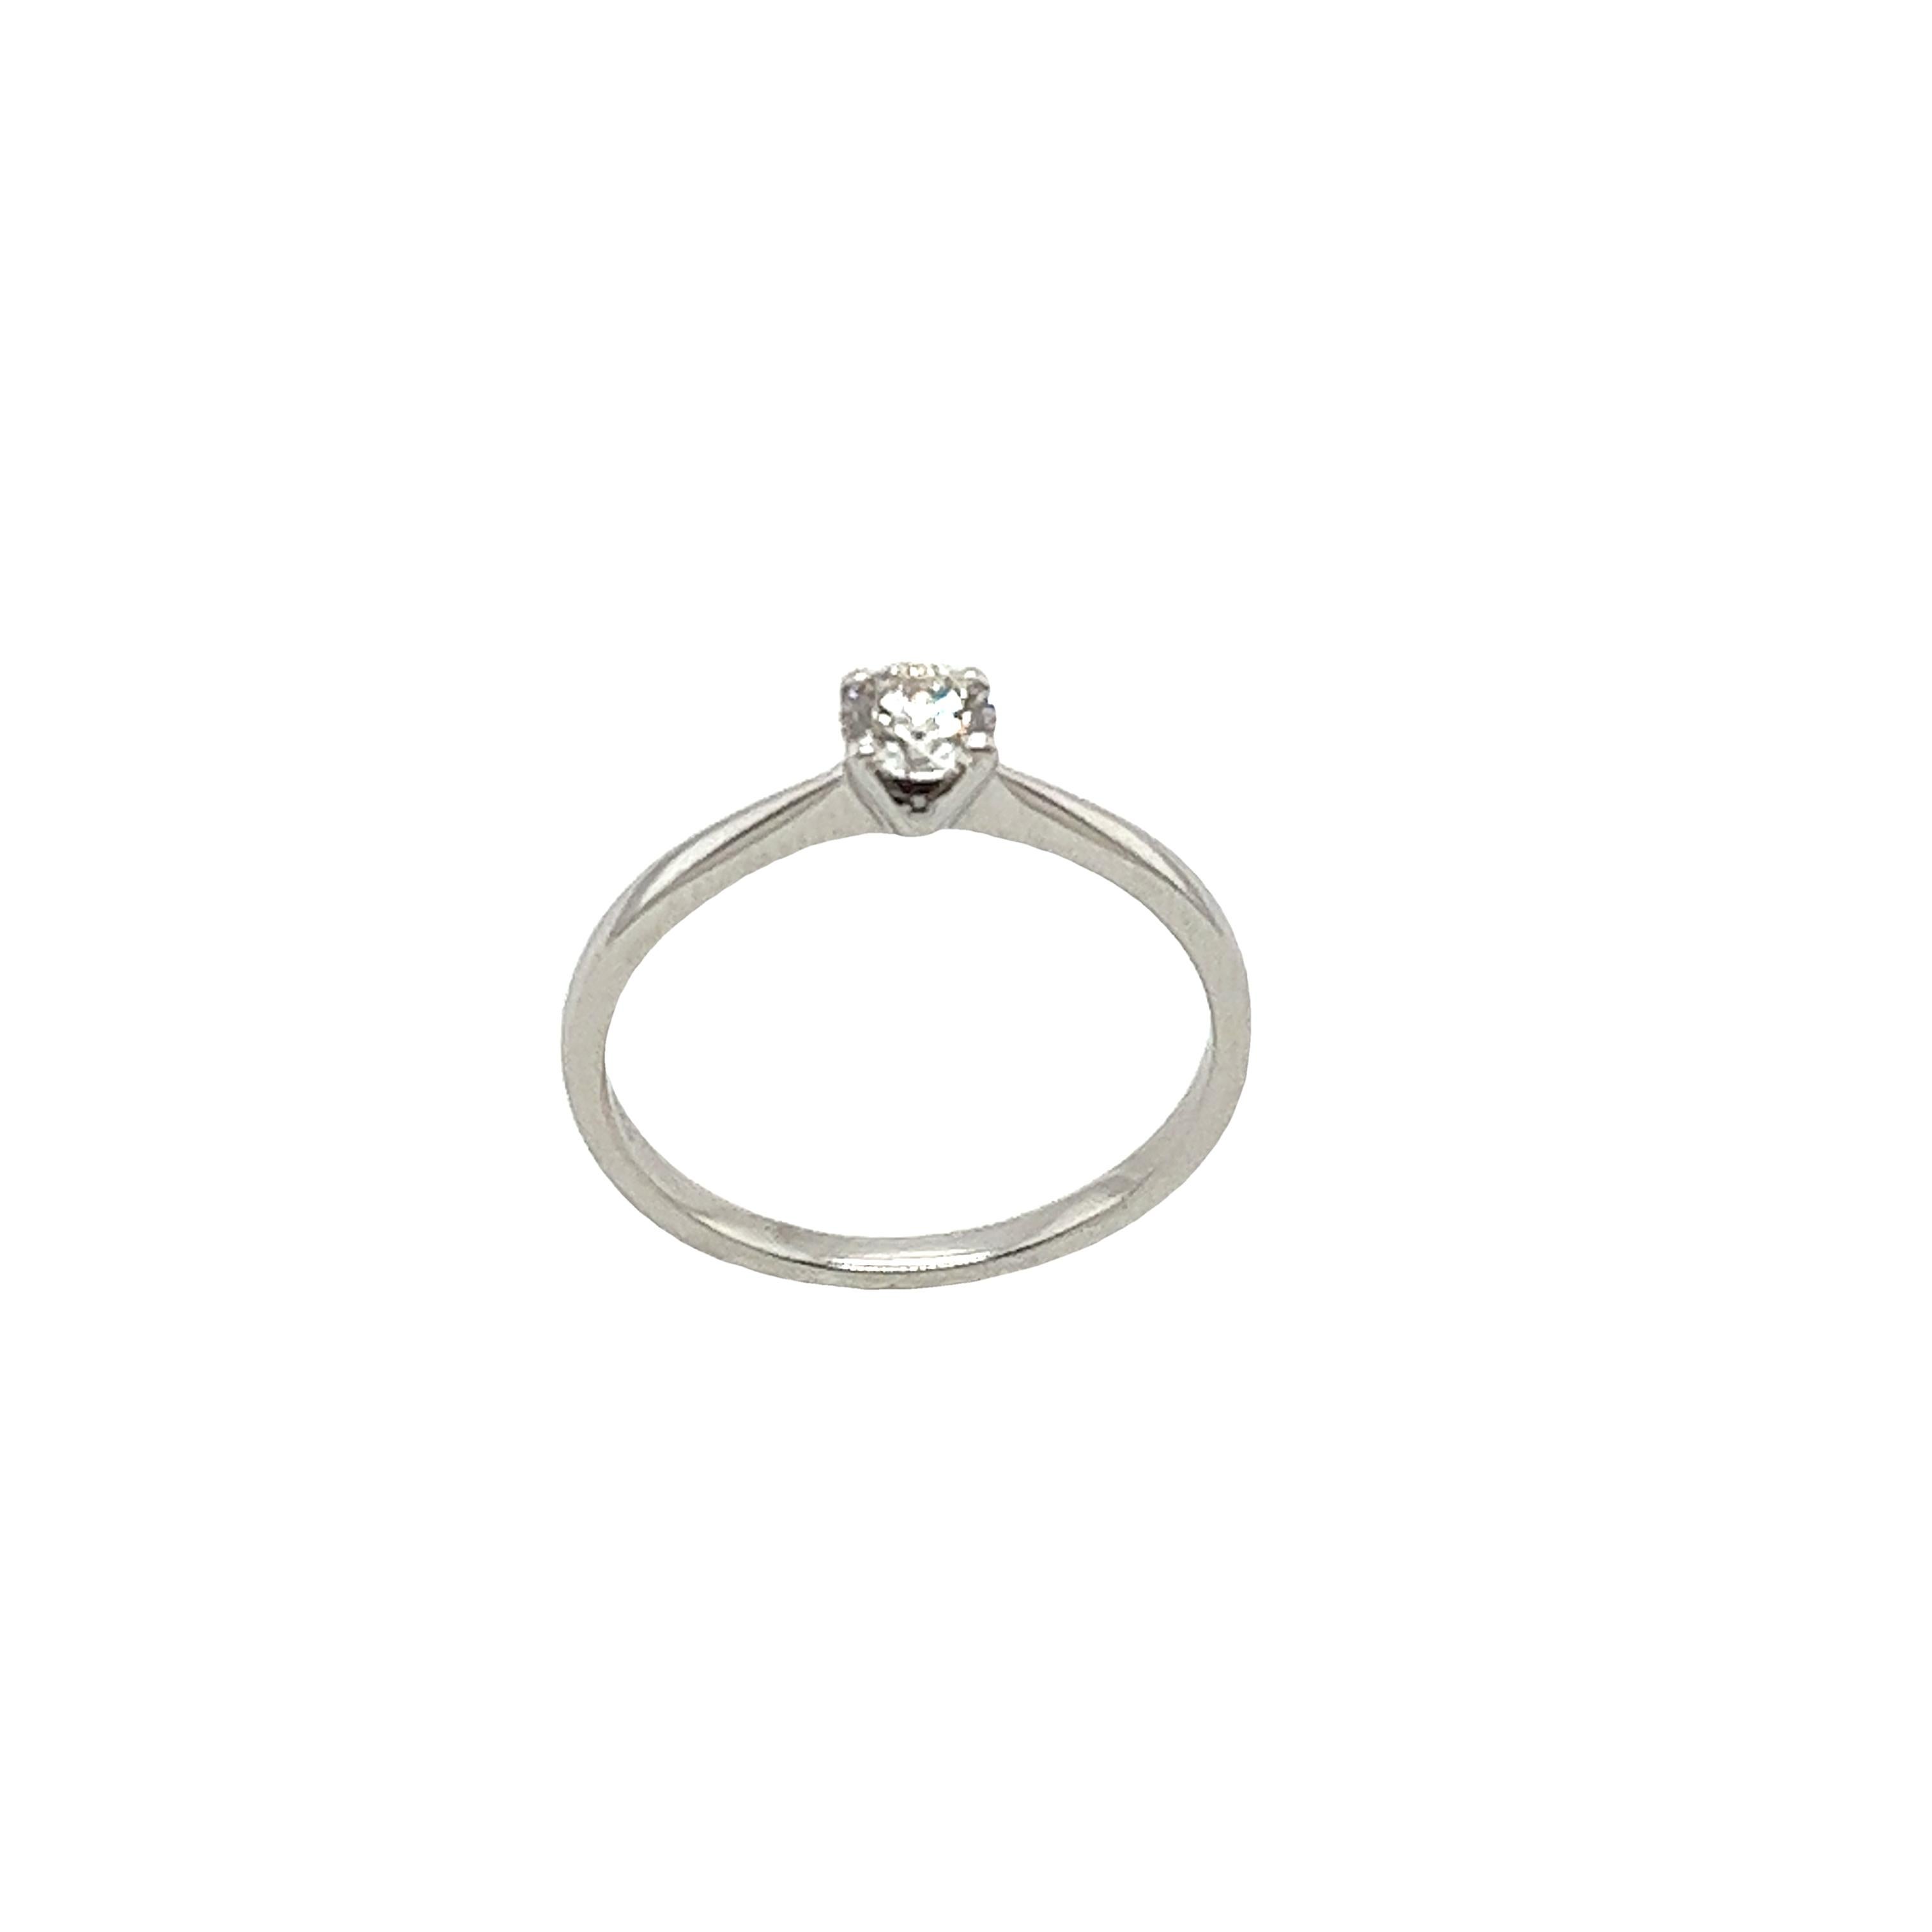 This gorgeous pre-loved solitaire diamond ring set with 0.31ct G/SI2 round brilliant cut diamond  
set in 18ct white gold setting can make a perfect engagement ring.

Total Diamond Weight: 0.31ct
Diamond Colour: E
Diamond Clarity: SI1
Width of Band: